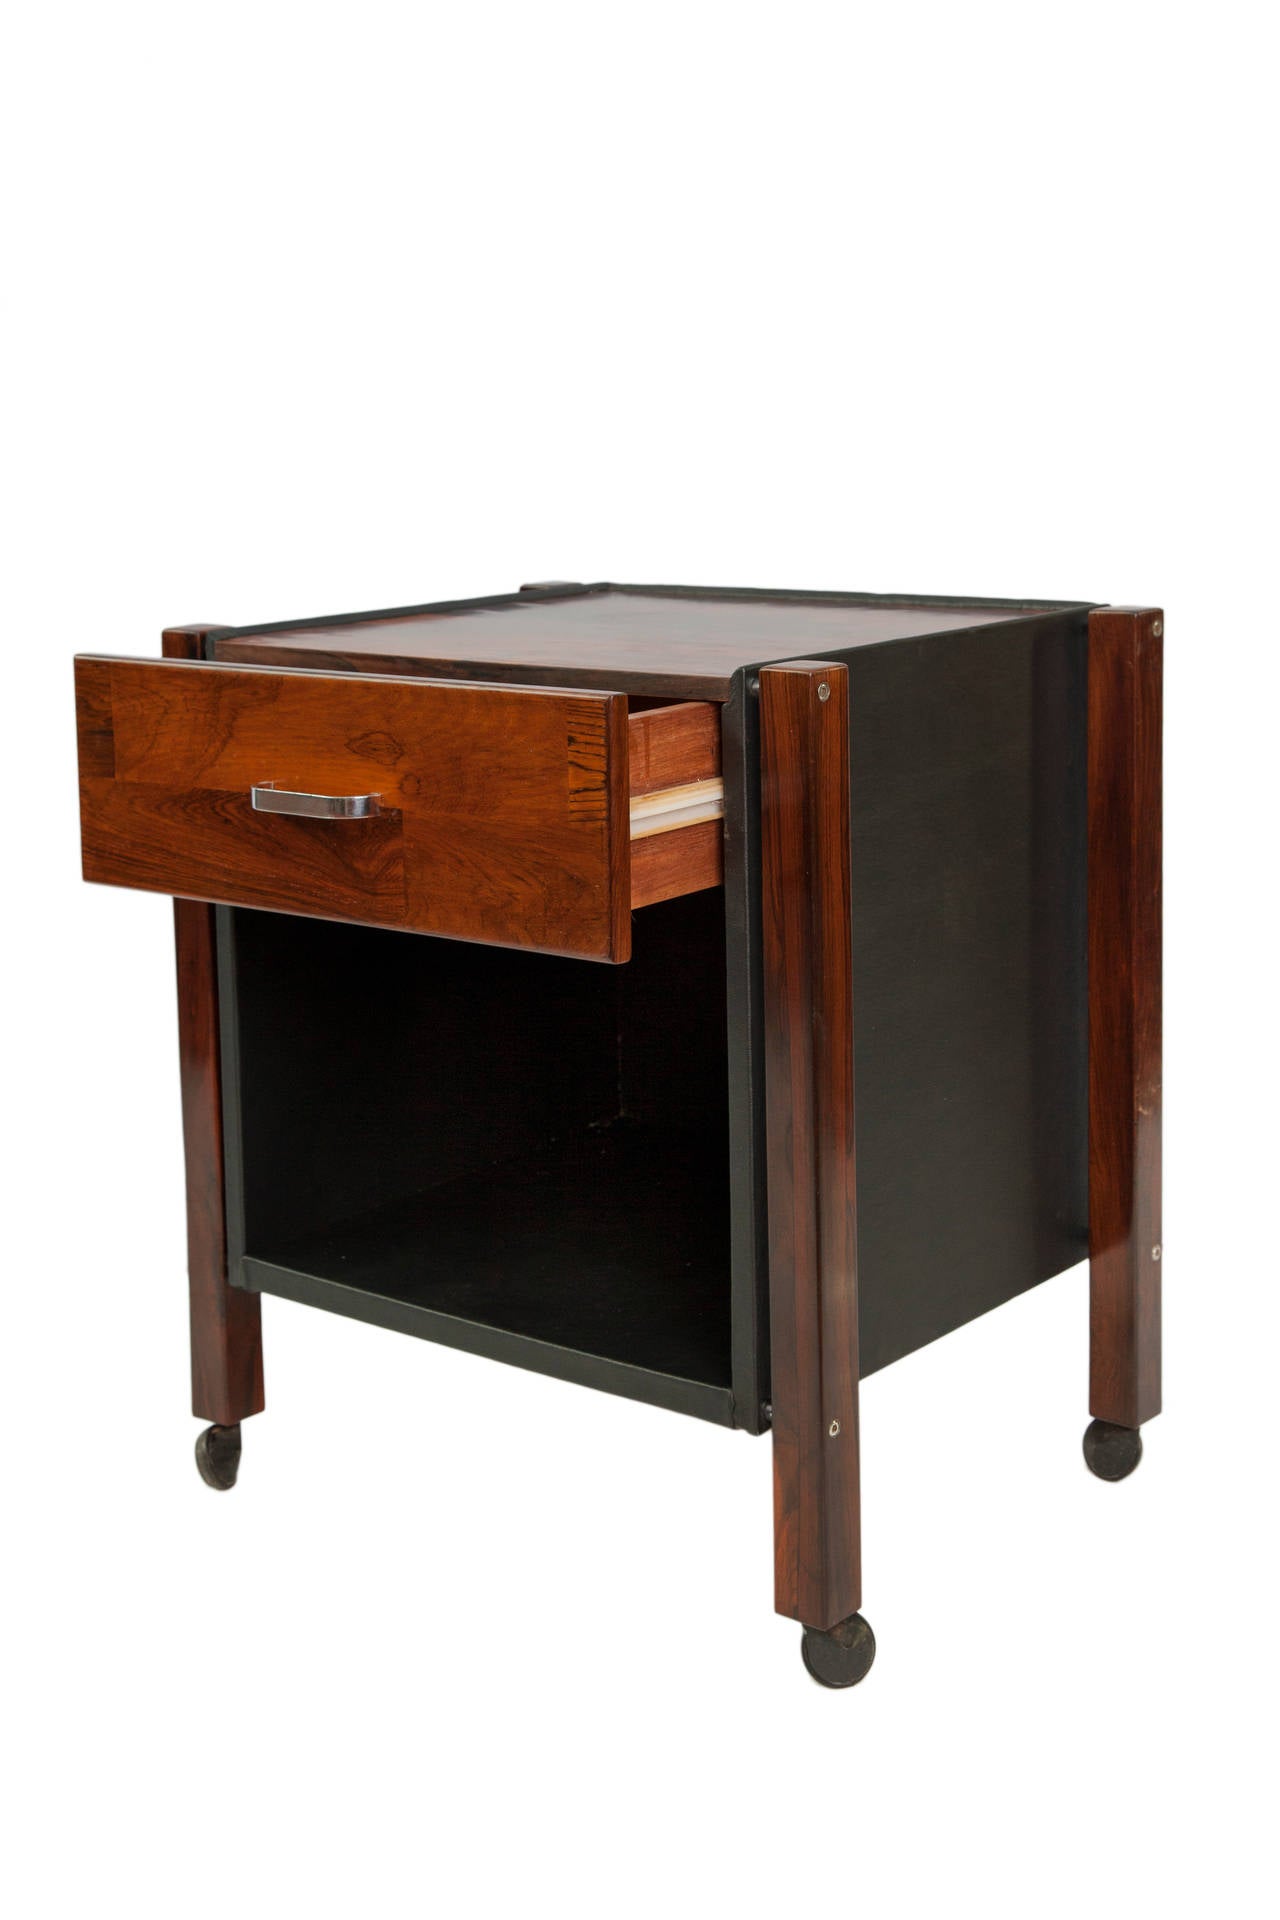 A vintage pair of side tables, produced circa 1960s, by designer Jorge Zalszupin for L'Atelier, in Brazilian jacaranda wood, each with patchwork tops, single drawers with chrome handles and black leather cases beneath, on caster wheels. Very good